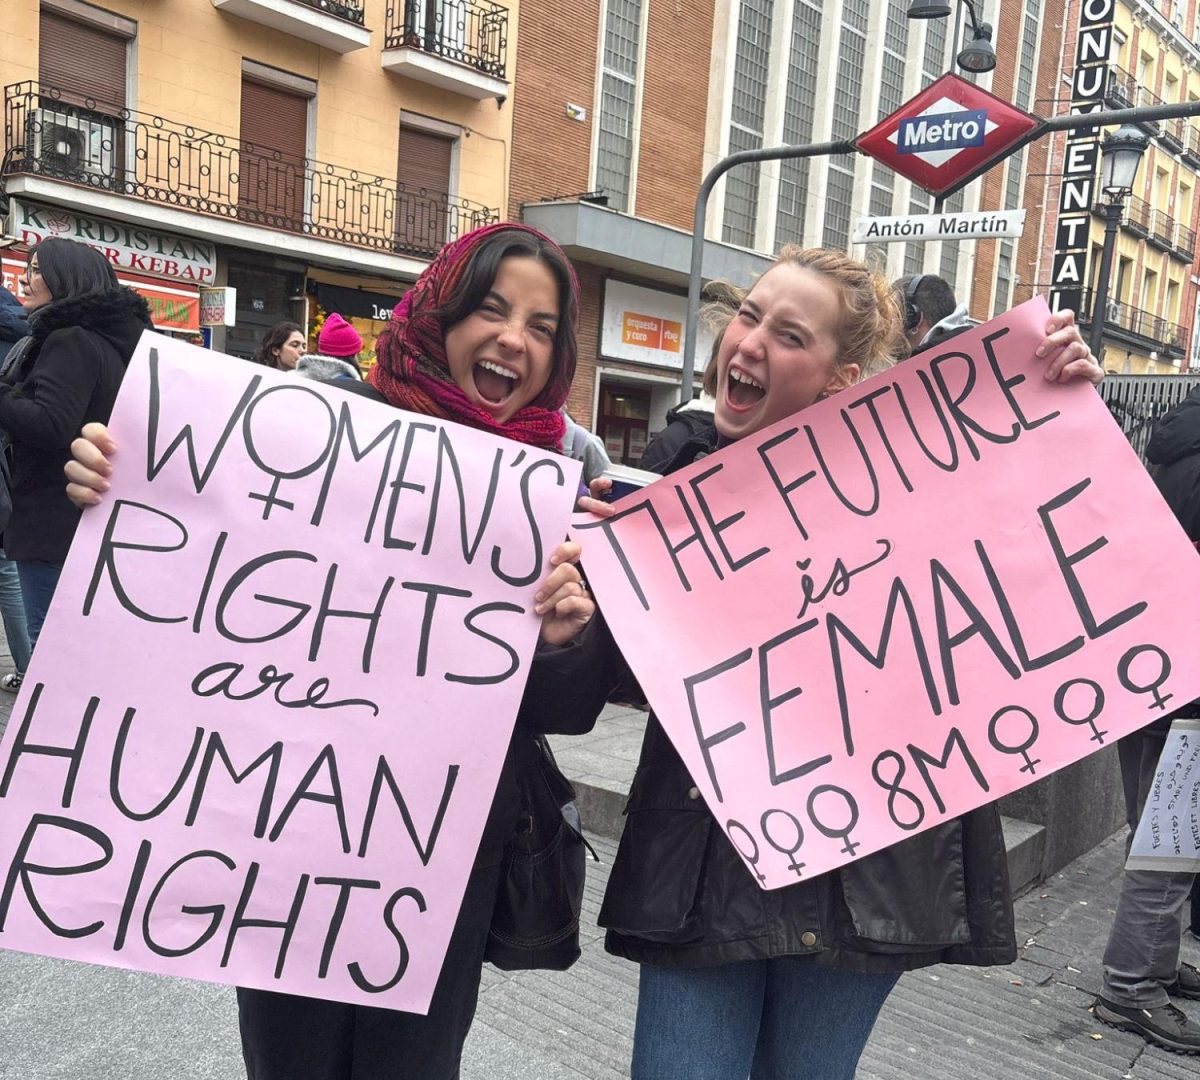 Two members of the Human Rights Club ready their signs before the start of the demonstration at Plaza de Antón Martín.